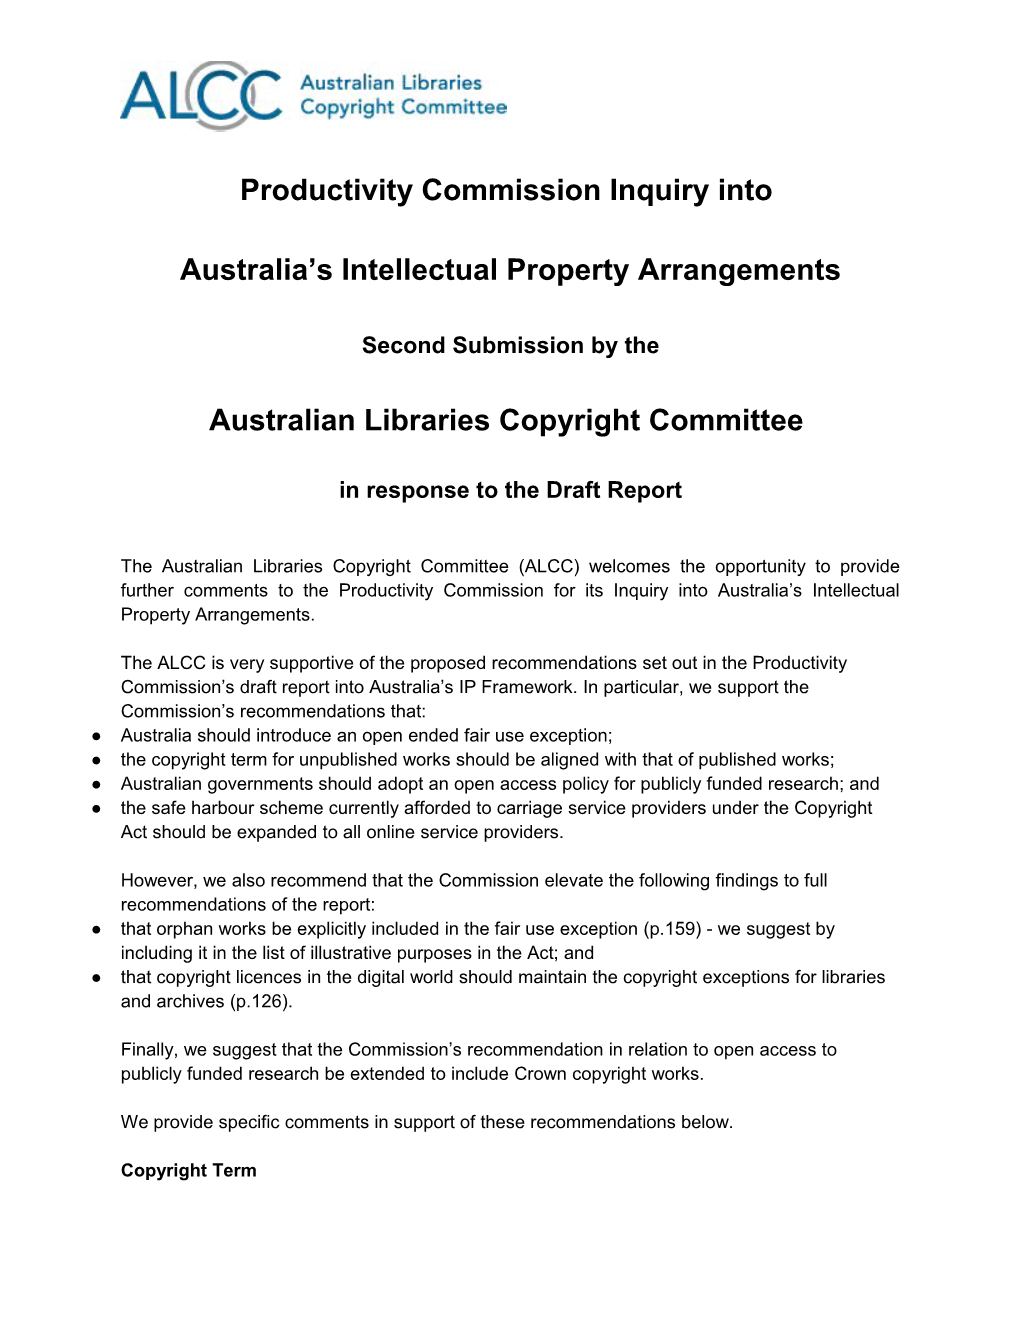 Submission DR602 - Australian Libraries Copyright Committee - Intellectual Property Arrangements